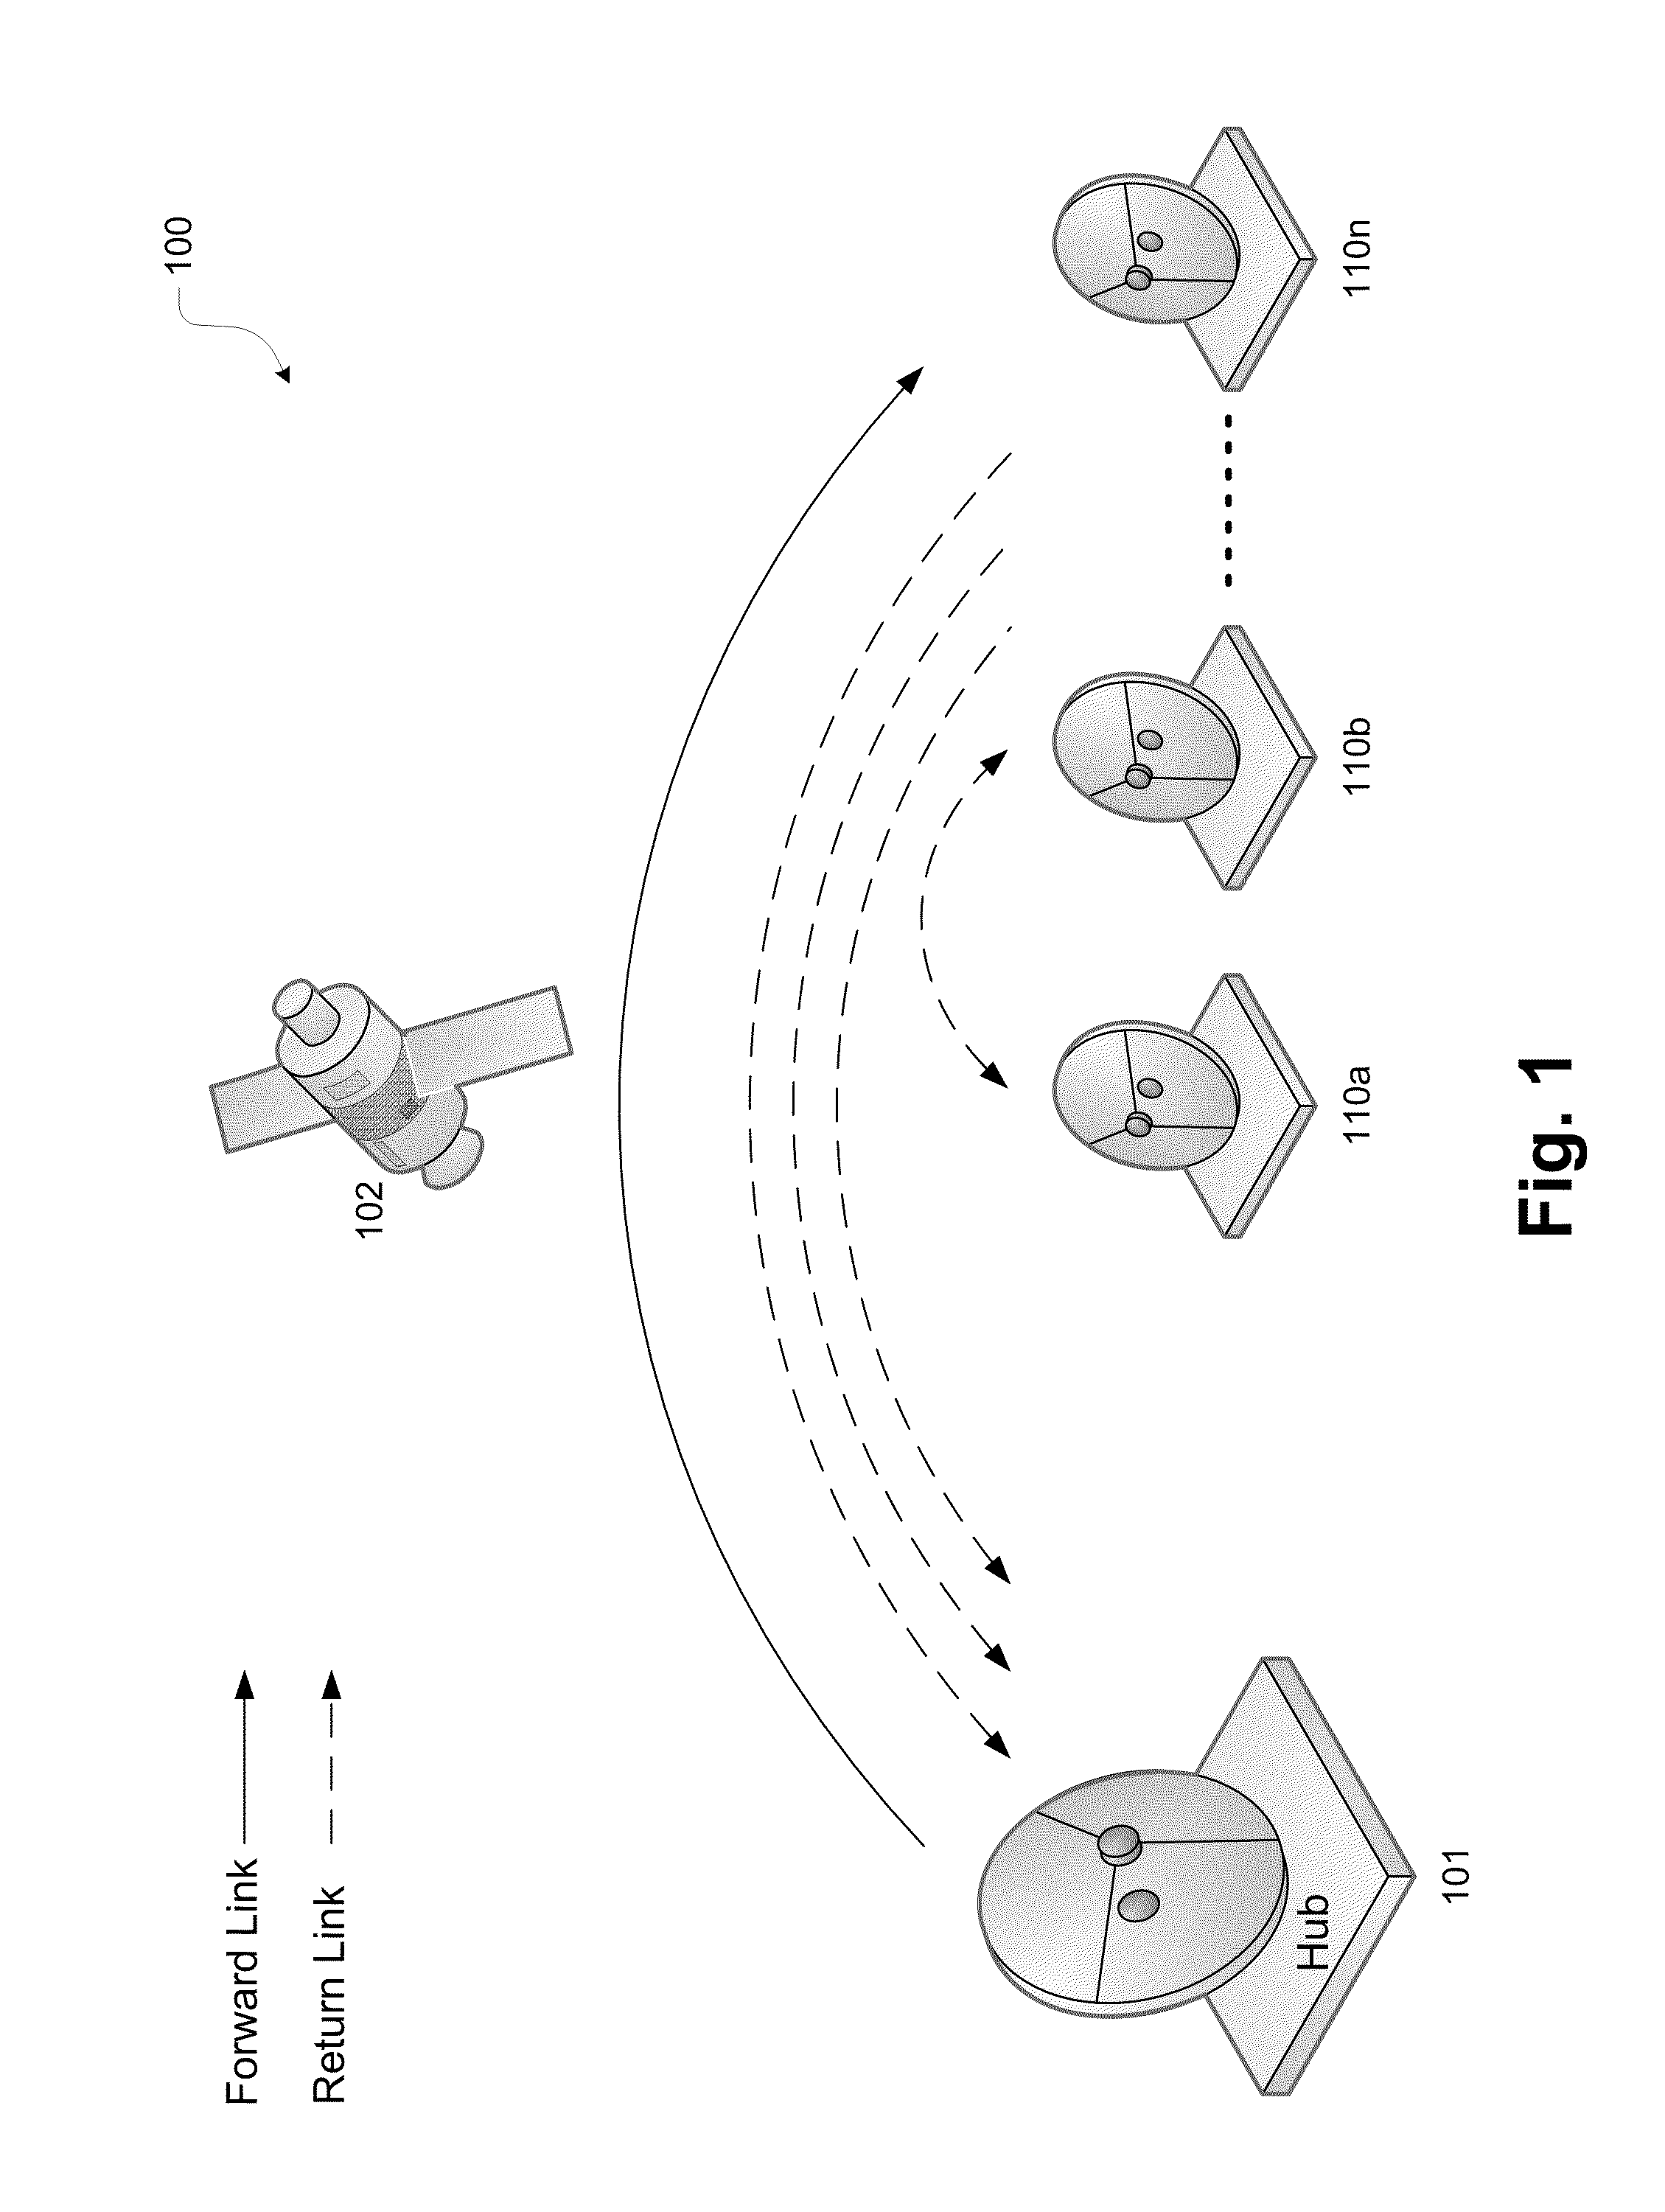 Elastic Access Scheme for Two-way Satellite Communication Systems